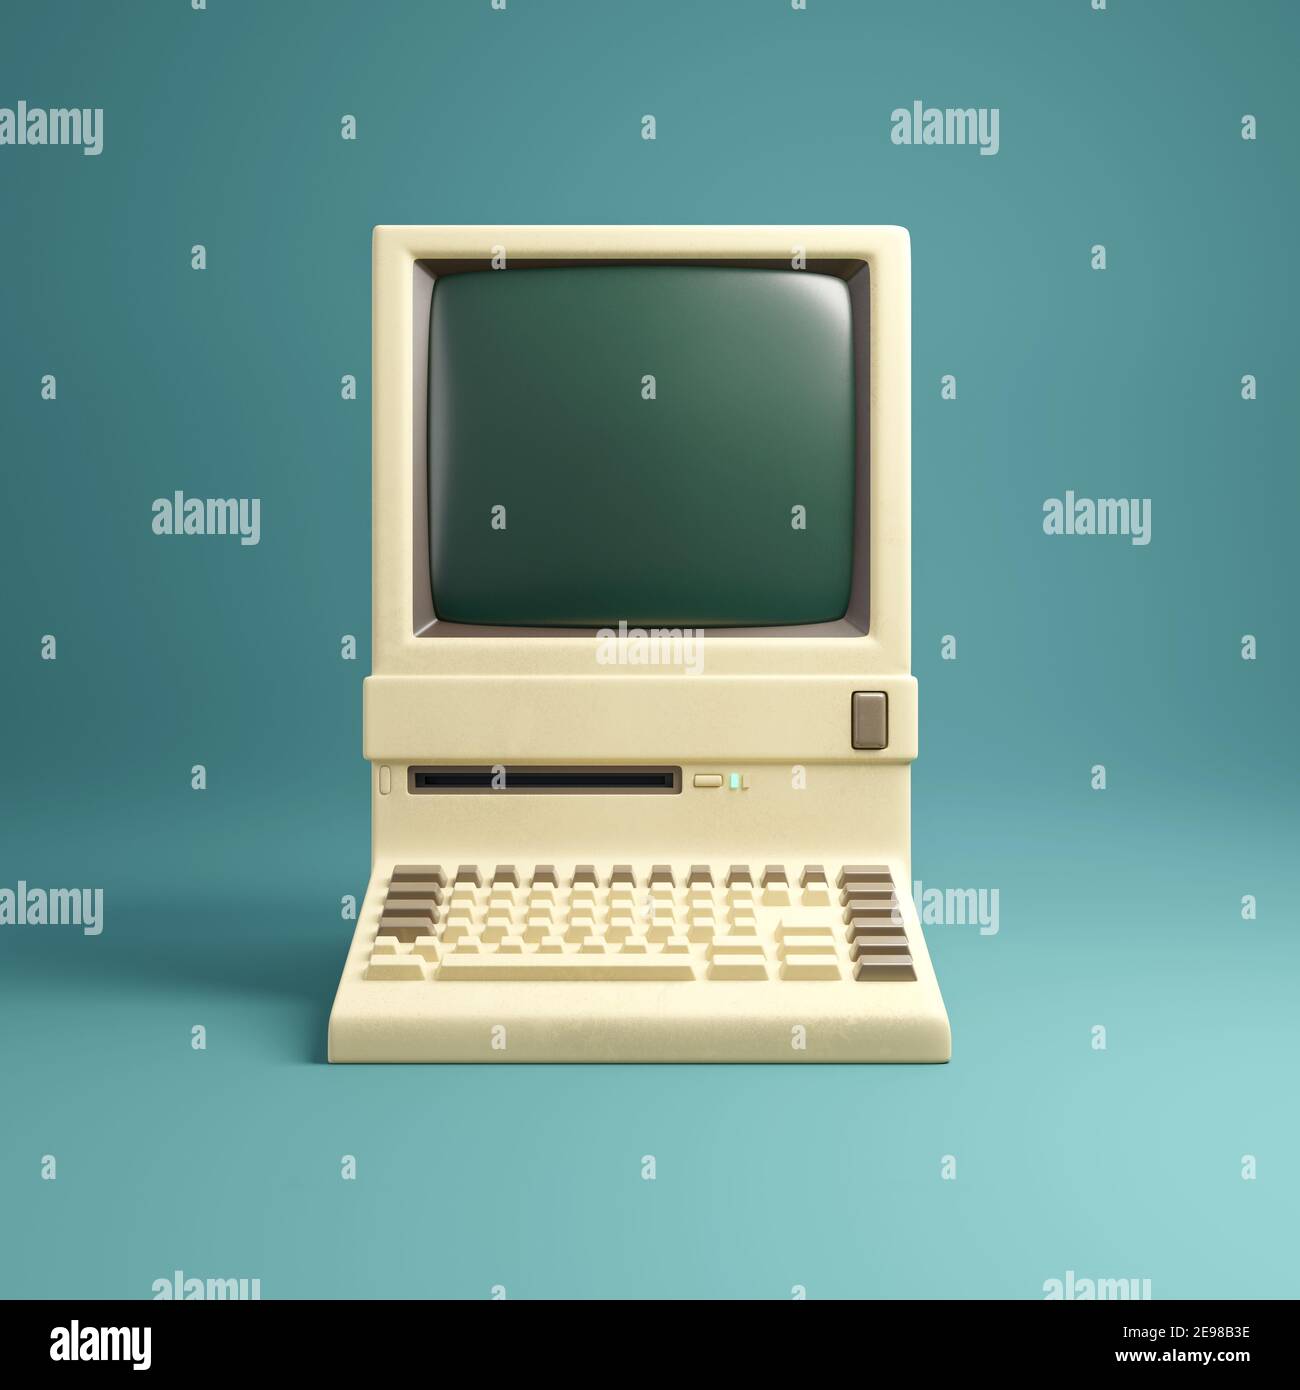 Retro 1980's style beige desktop computer and built in screen and keyboard.  3D illustration. Stock Photo